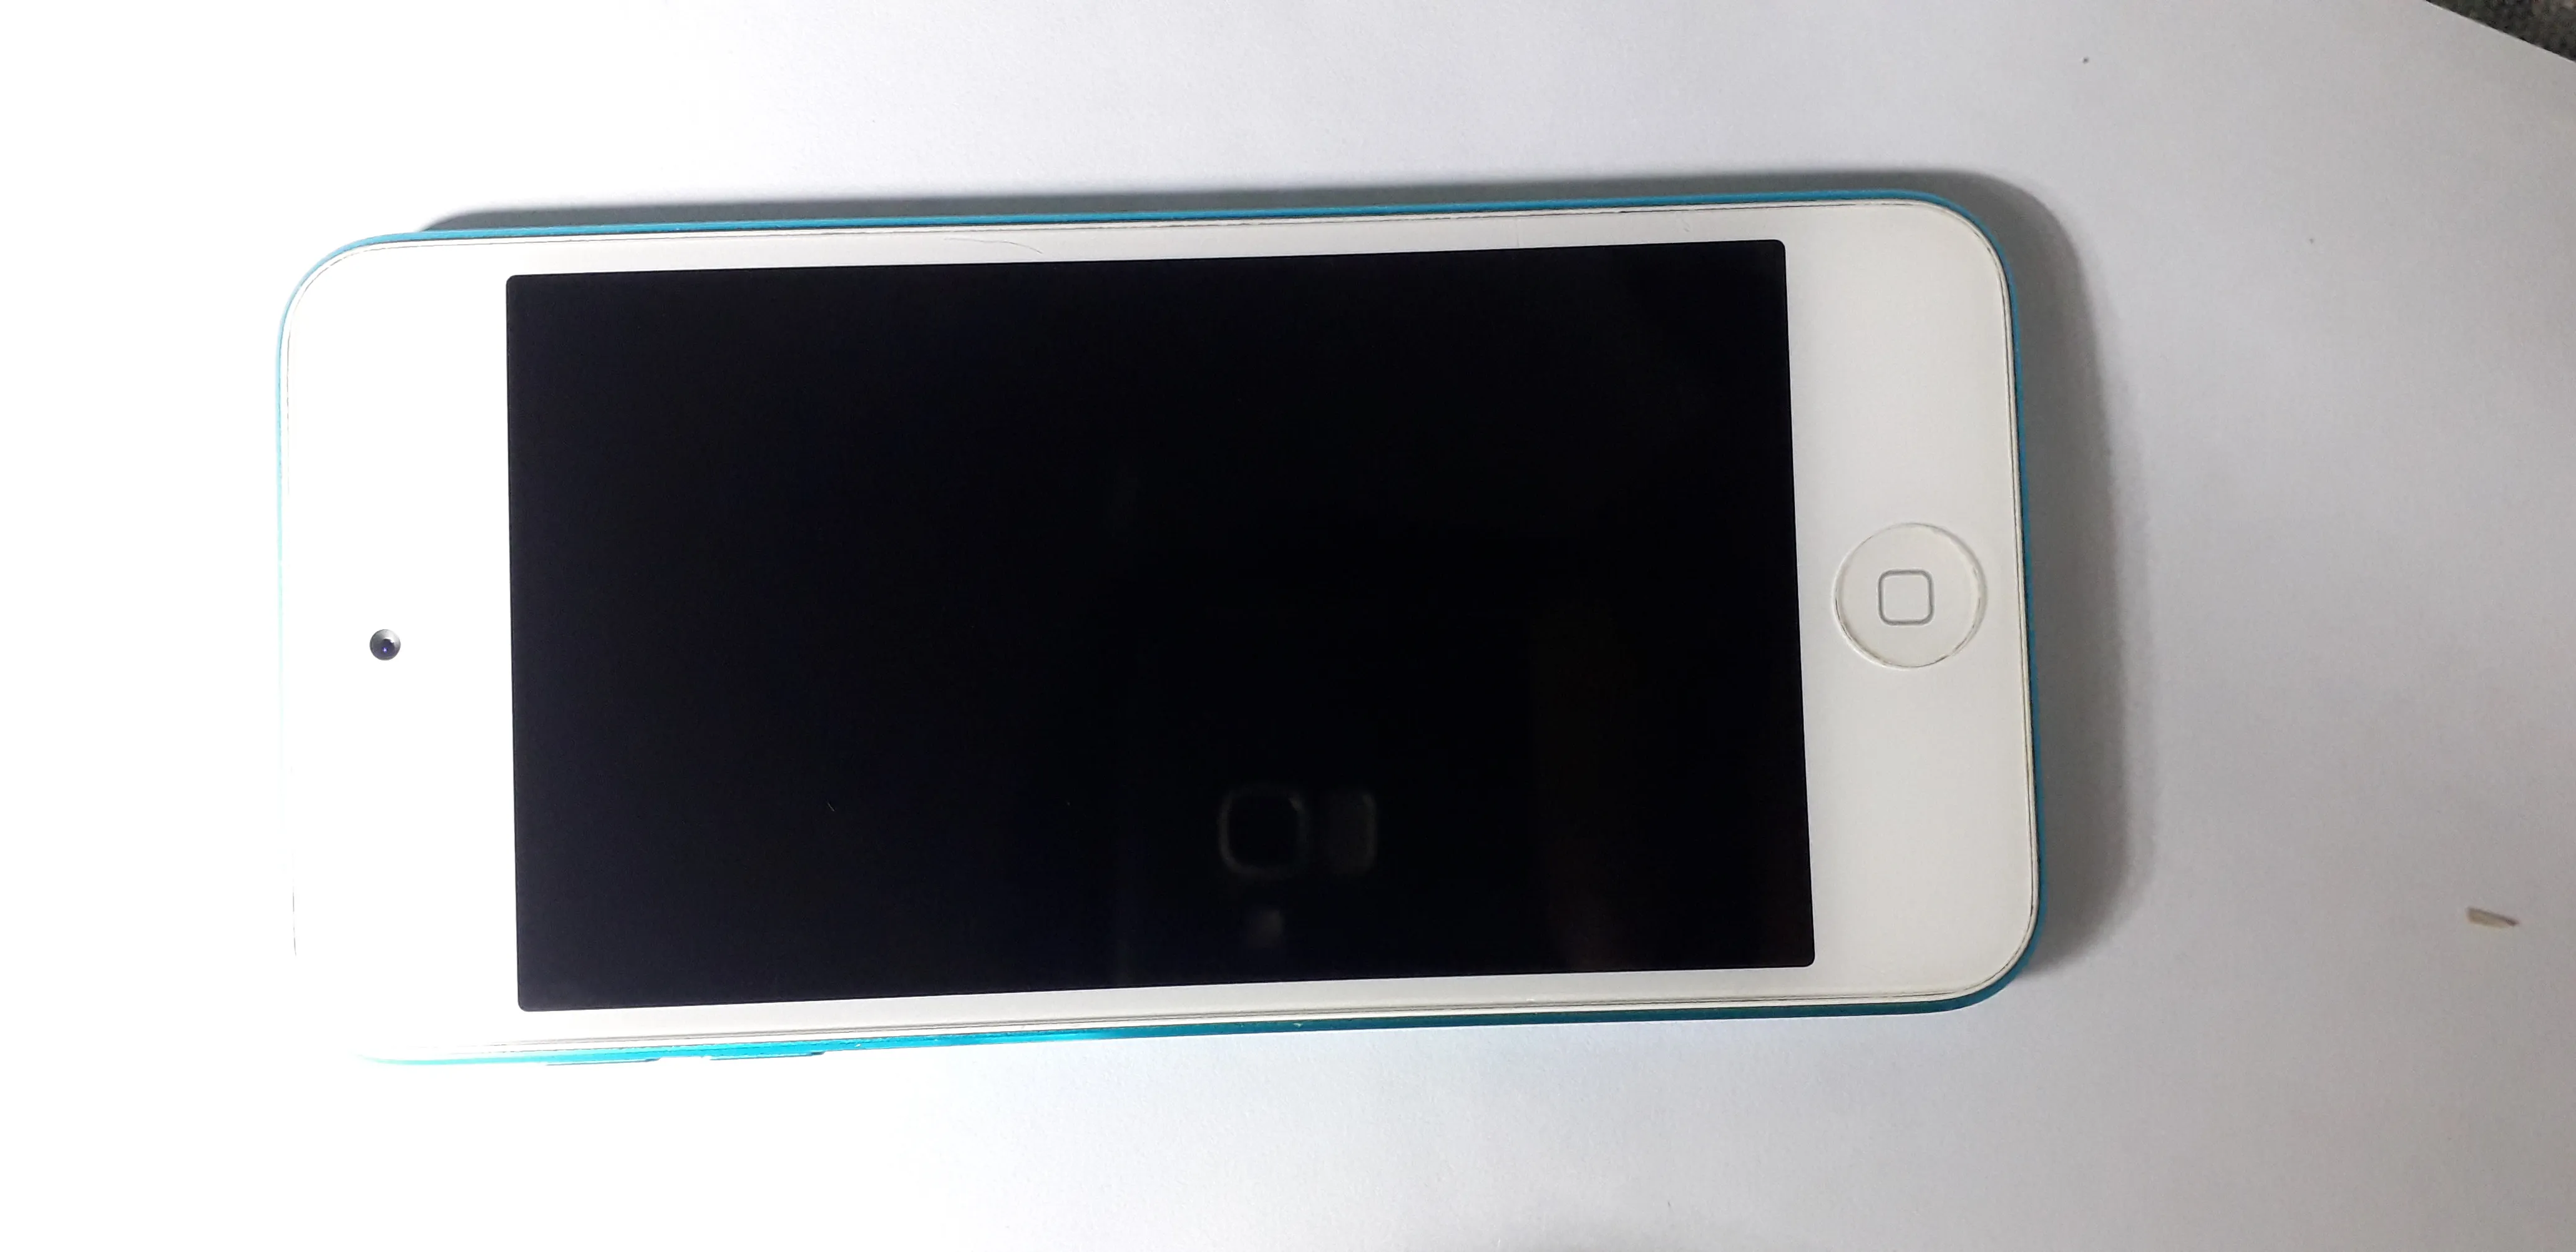 APPLE i pod 5th genration 32 gb for sale - photo 2